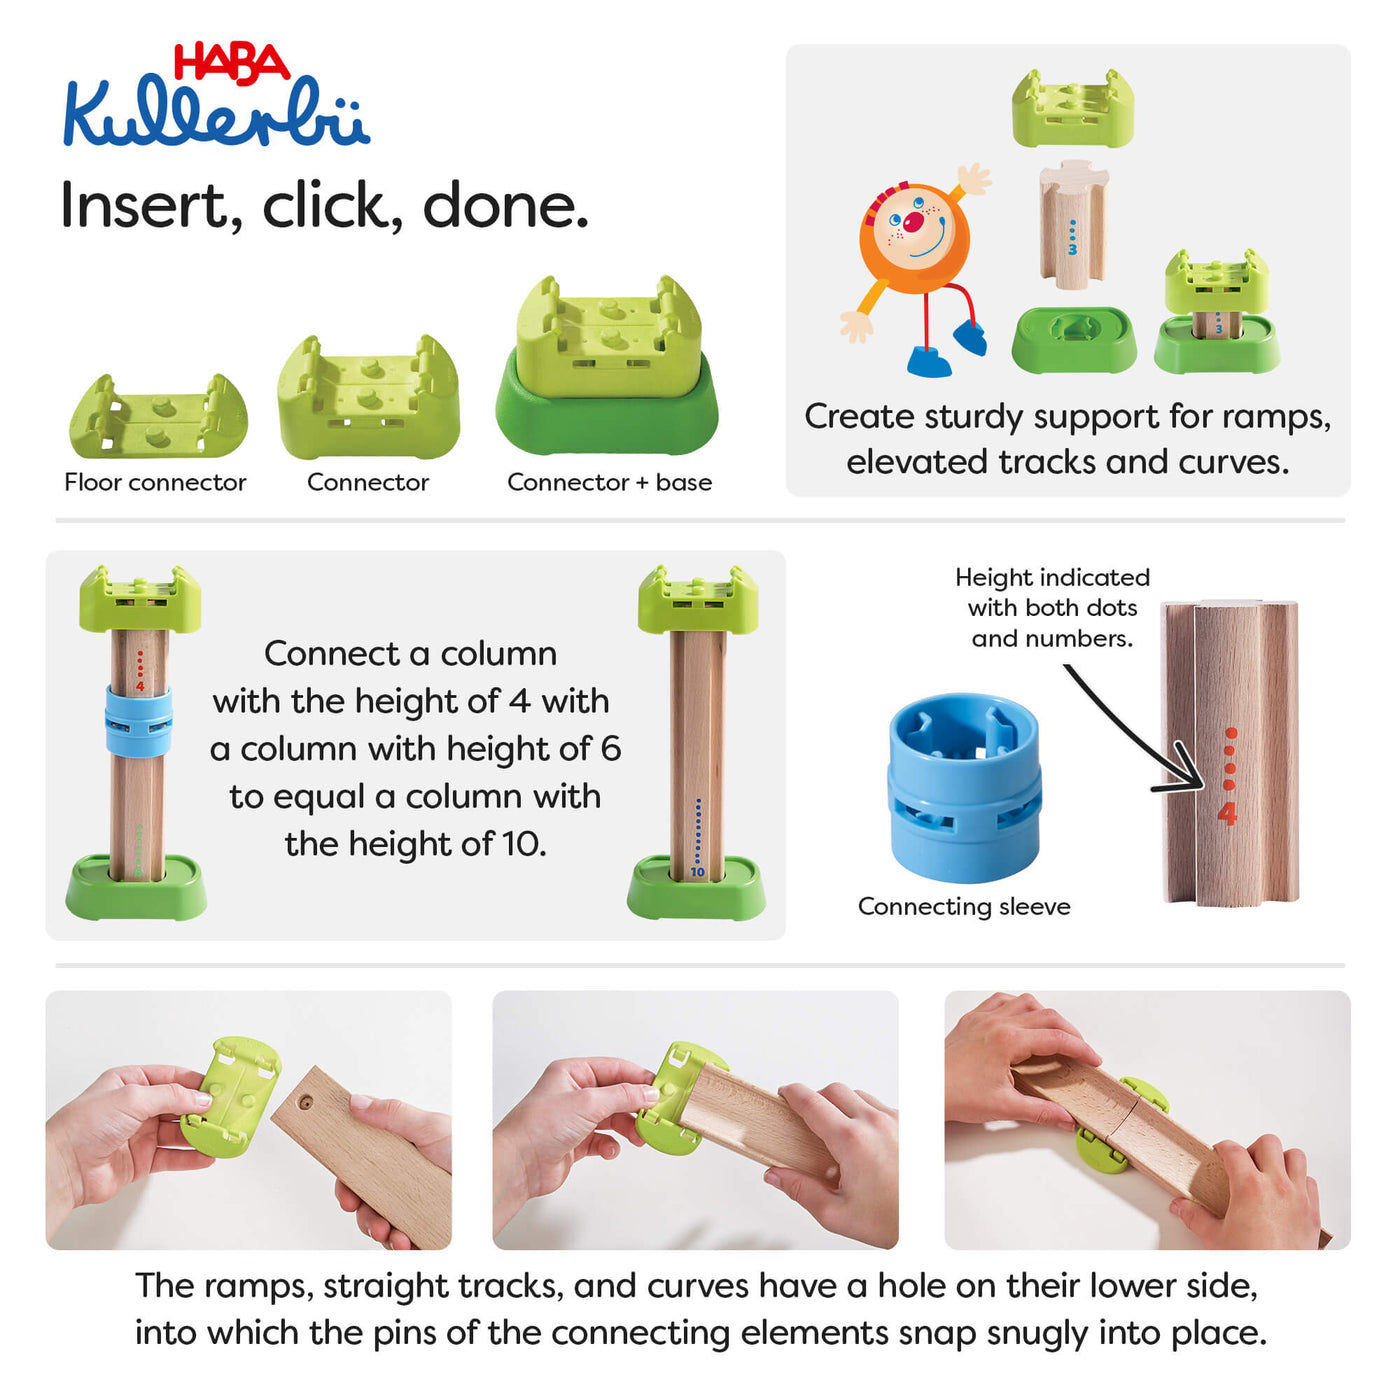 HABA Kullerbu insert, click, done - floor connector, connect, connector + base, create sturdy support for ramps, elevated tracks and curves. Connect a column with the height of 4 with a column with height of 6 to equal a column with the height of 10. Height indicated with boths dots and numbers. The ramps, straight tracks, and curves have a hole on their lower side, into which the pins of the connecting elements snap snugly into place.